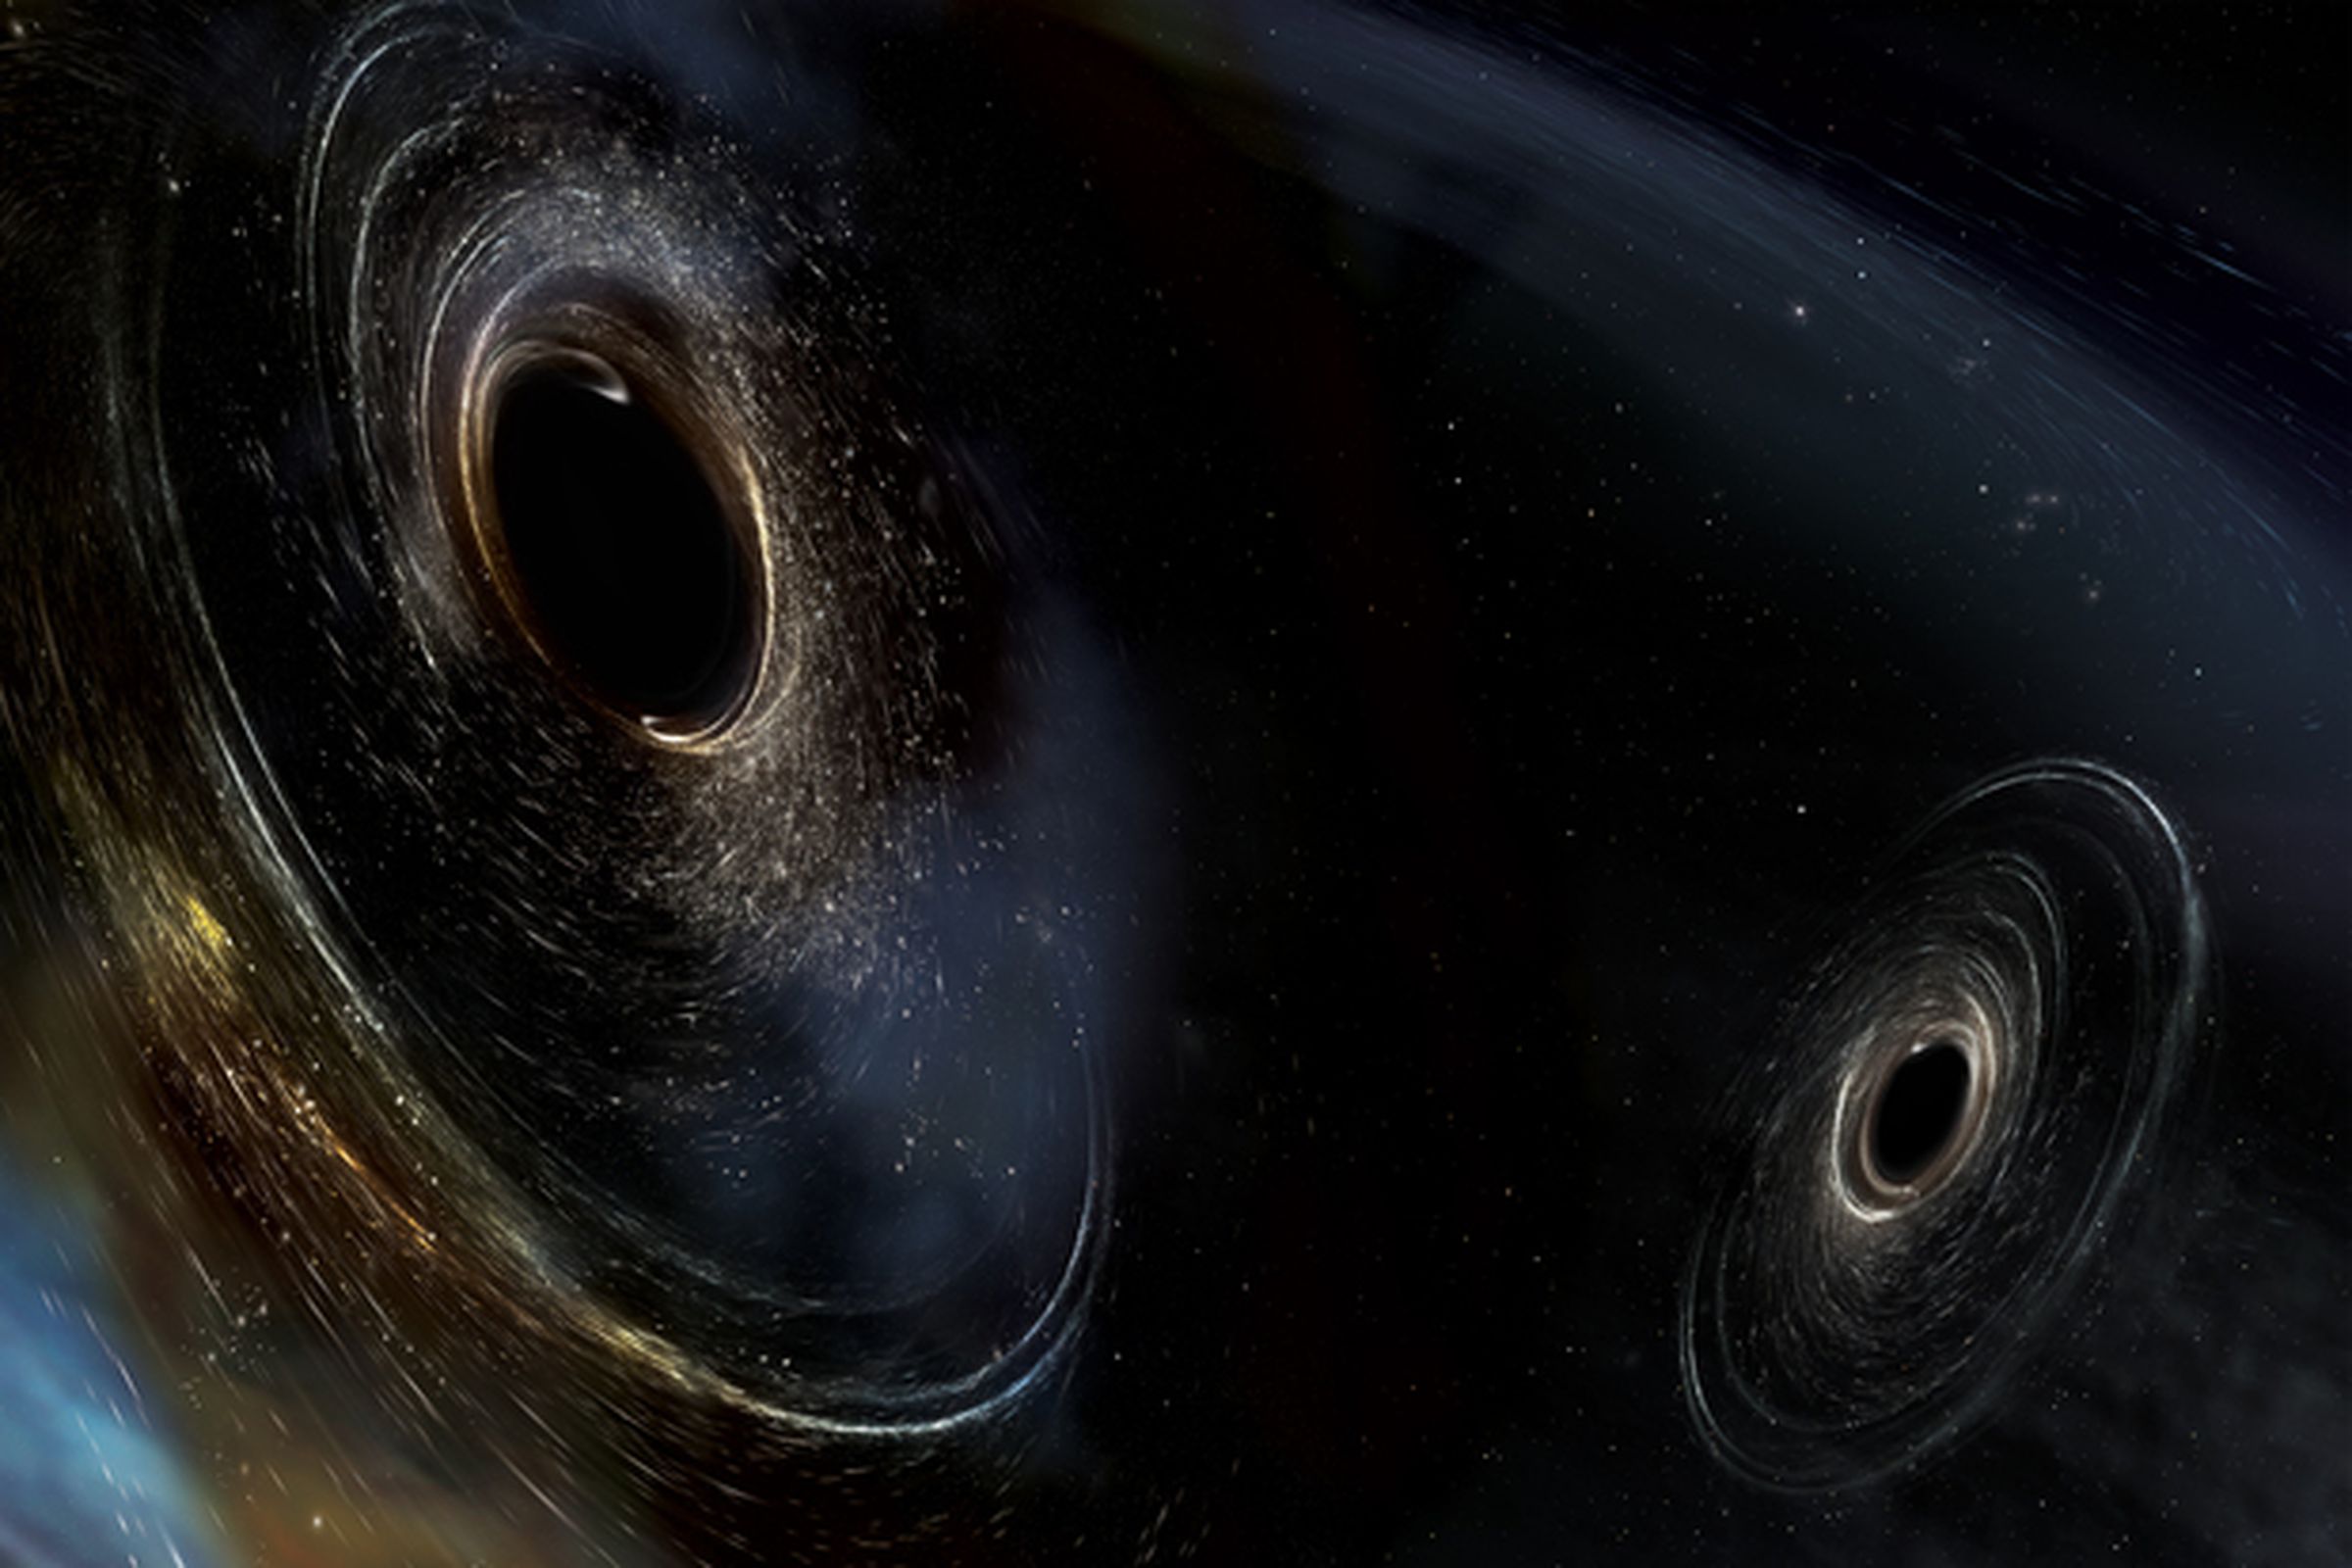 light swirls around two black points in space, one larger than the other